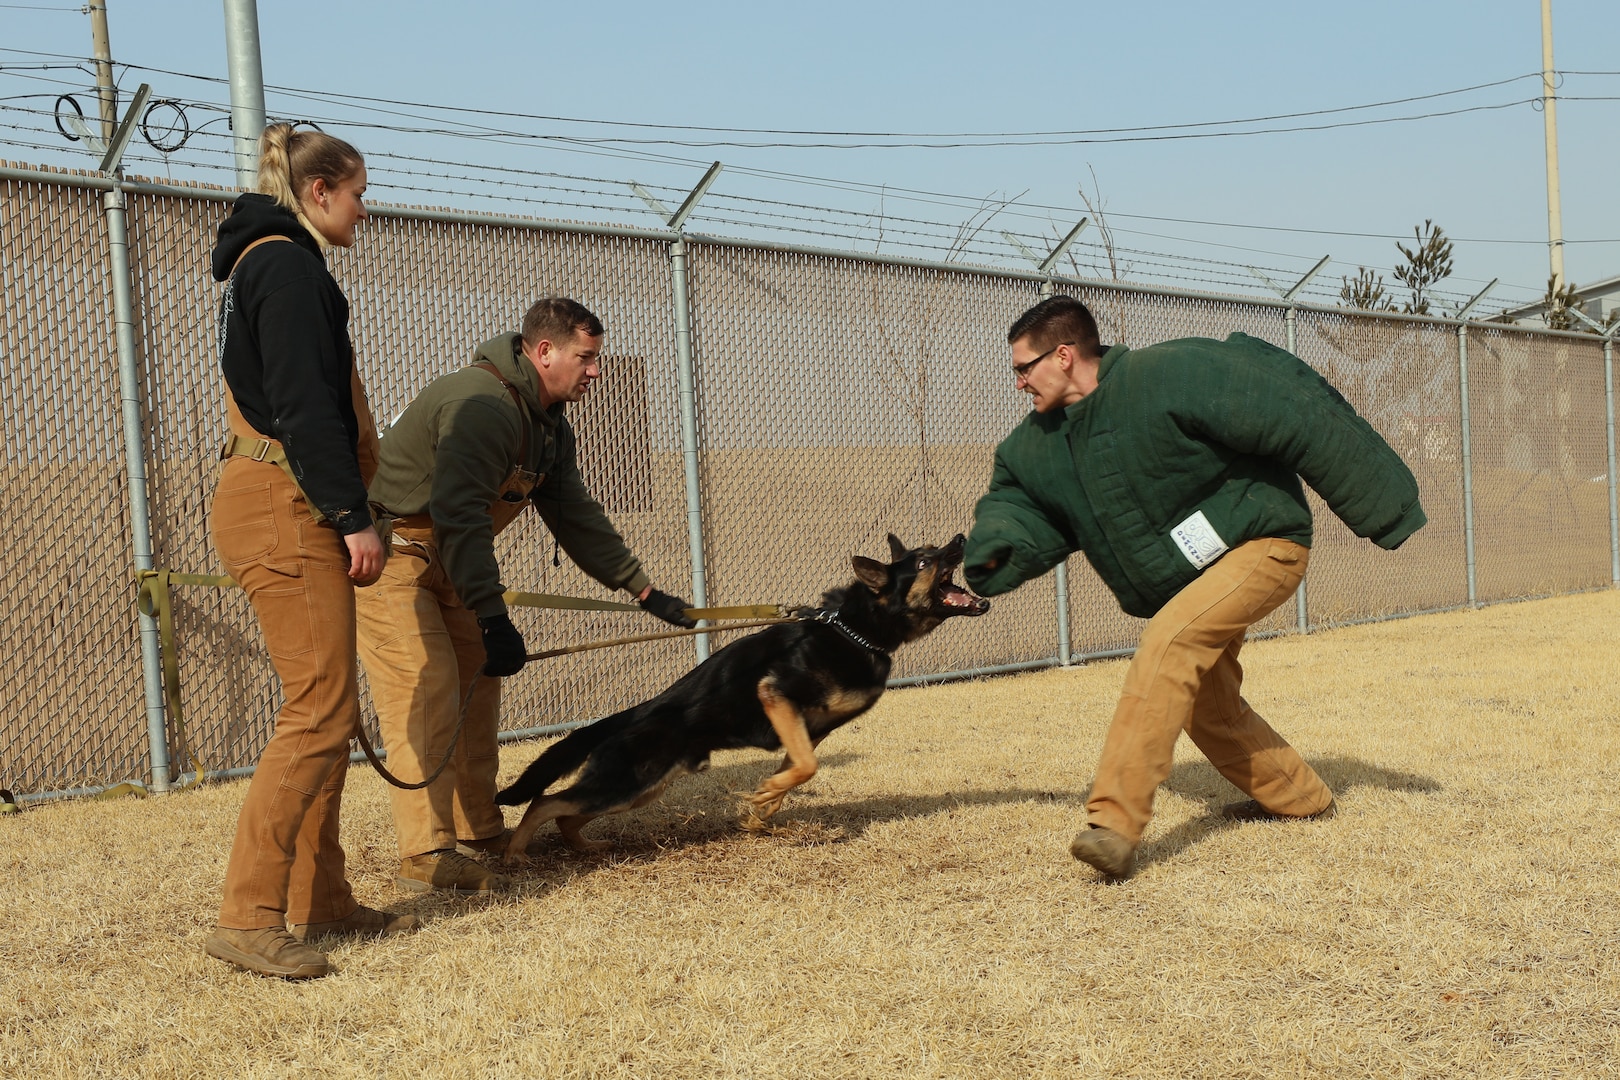 Airman watches instructor who holds the leash of the military working dog who is leaping toward a soldier wearing a protective bit shirt, mouth open and ready to bite the arm.